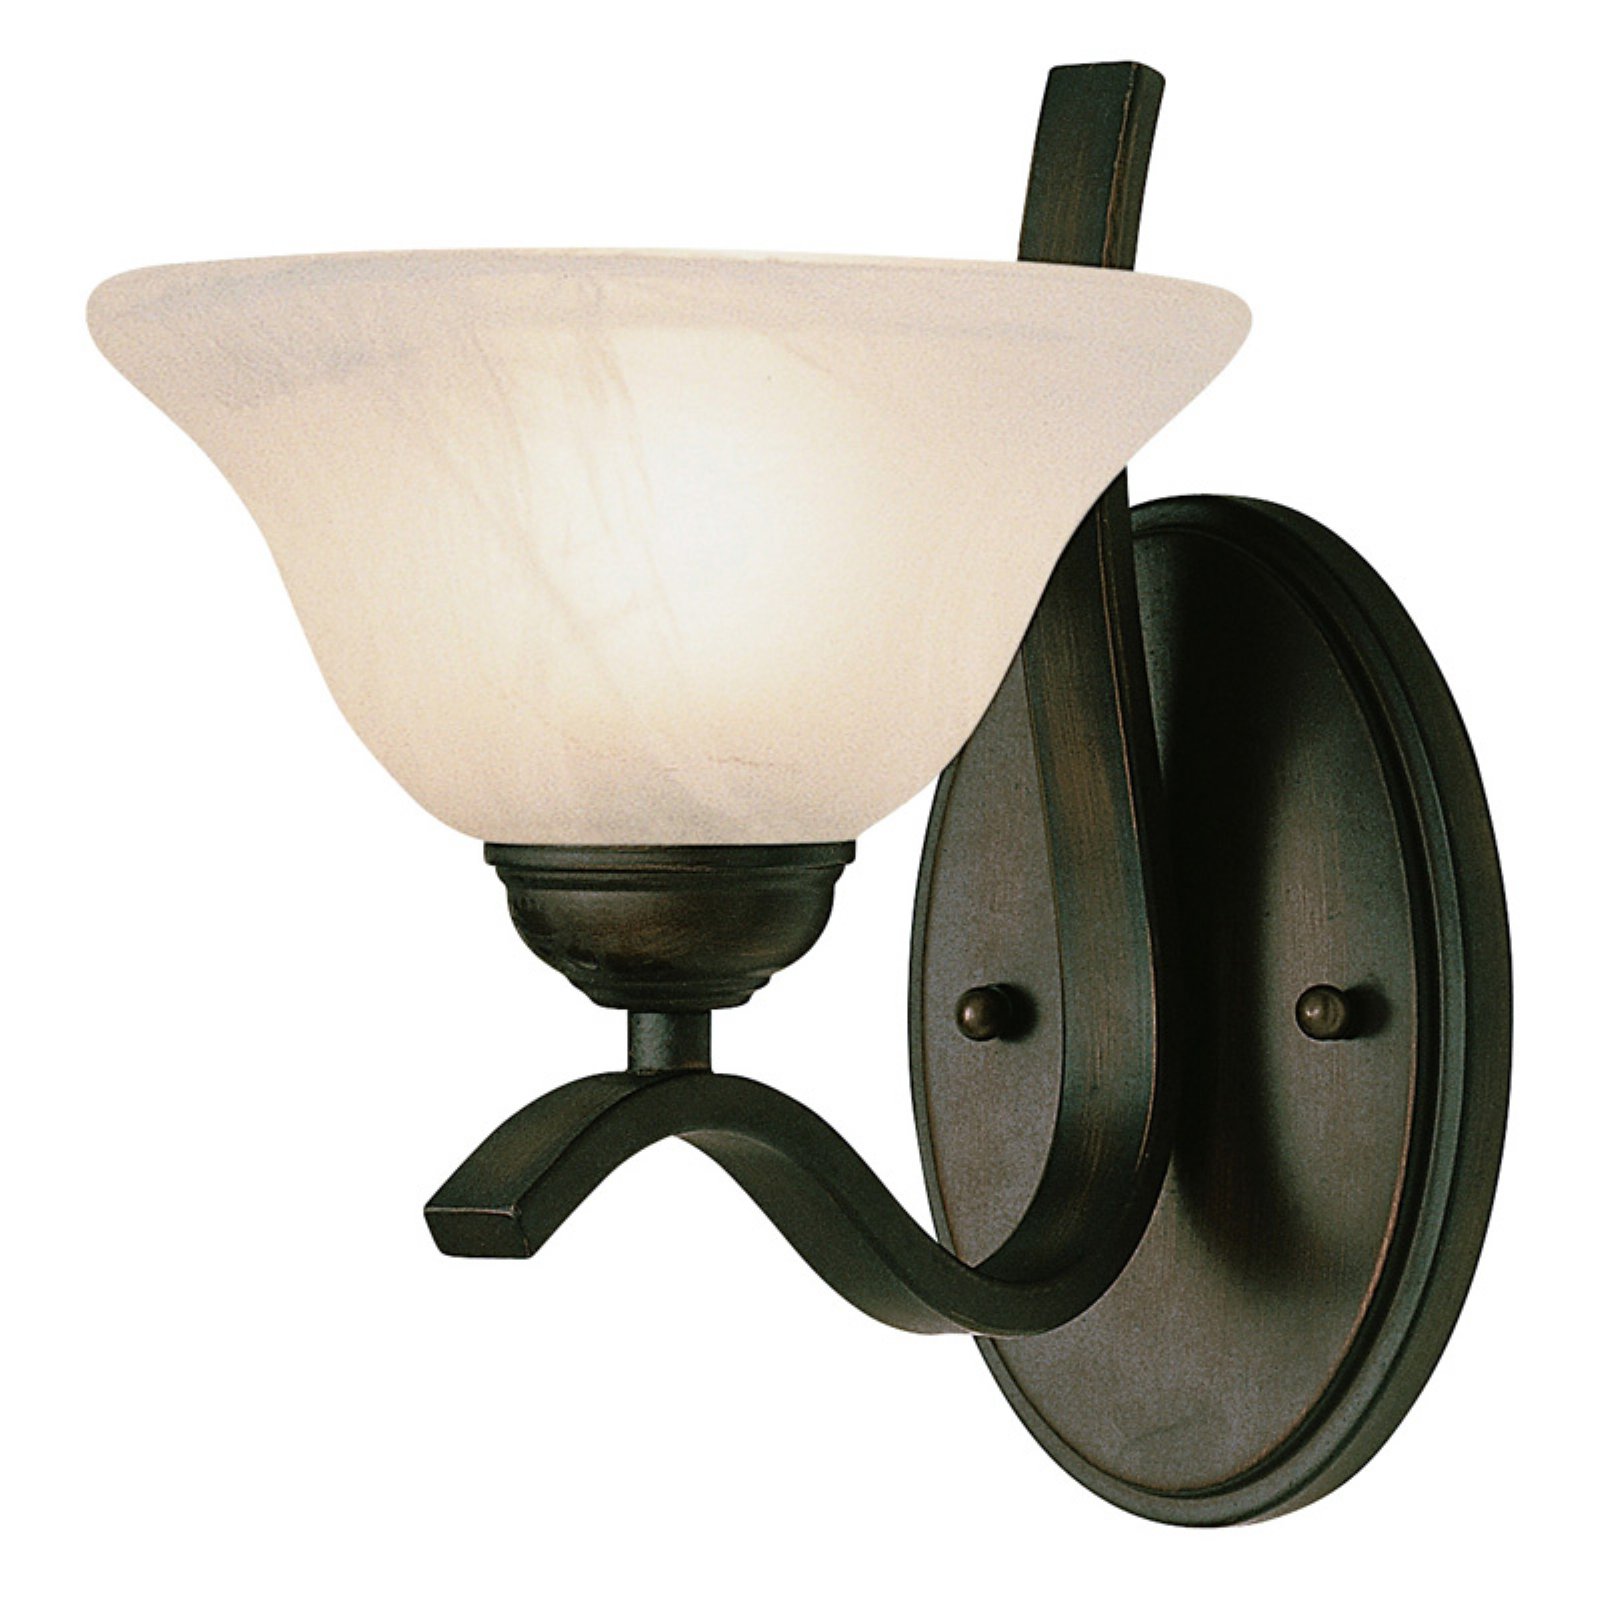 Trans Globe Lighting - One Light Wall Sconce-Rubbed Oil Bronze Finish - image 1 of 2